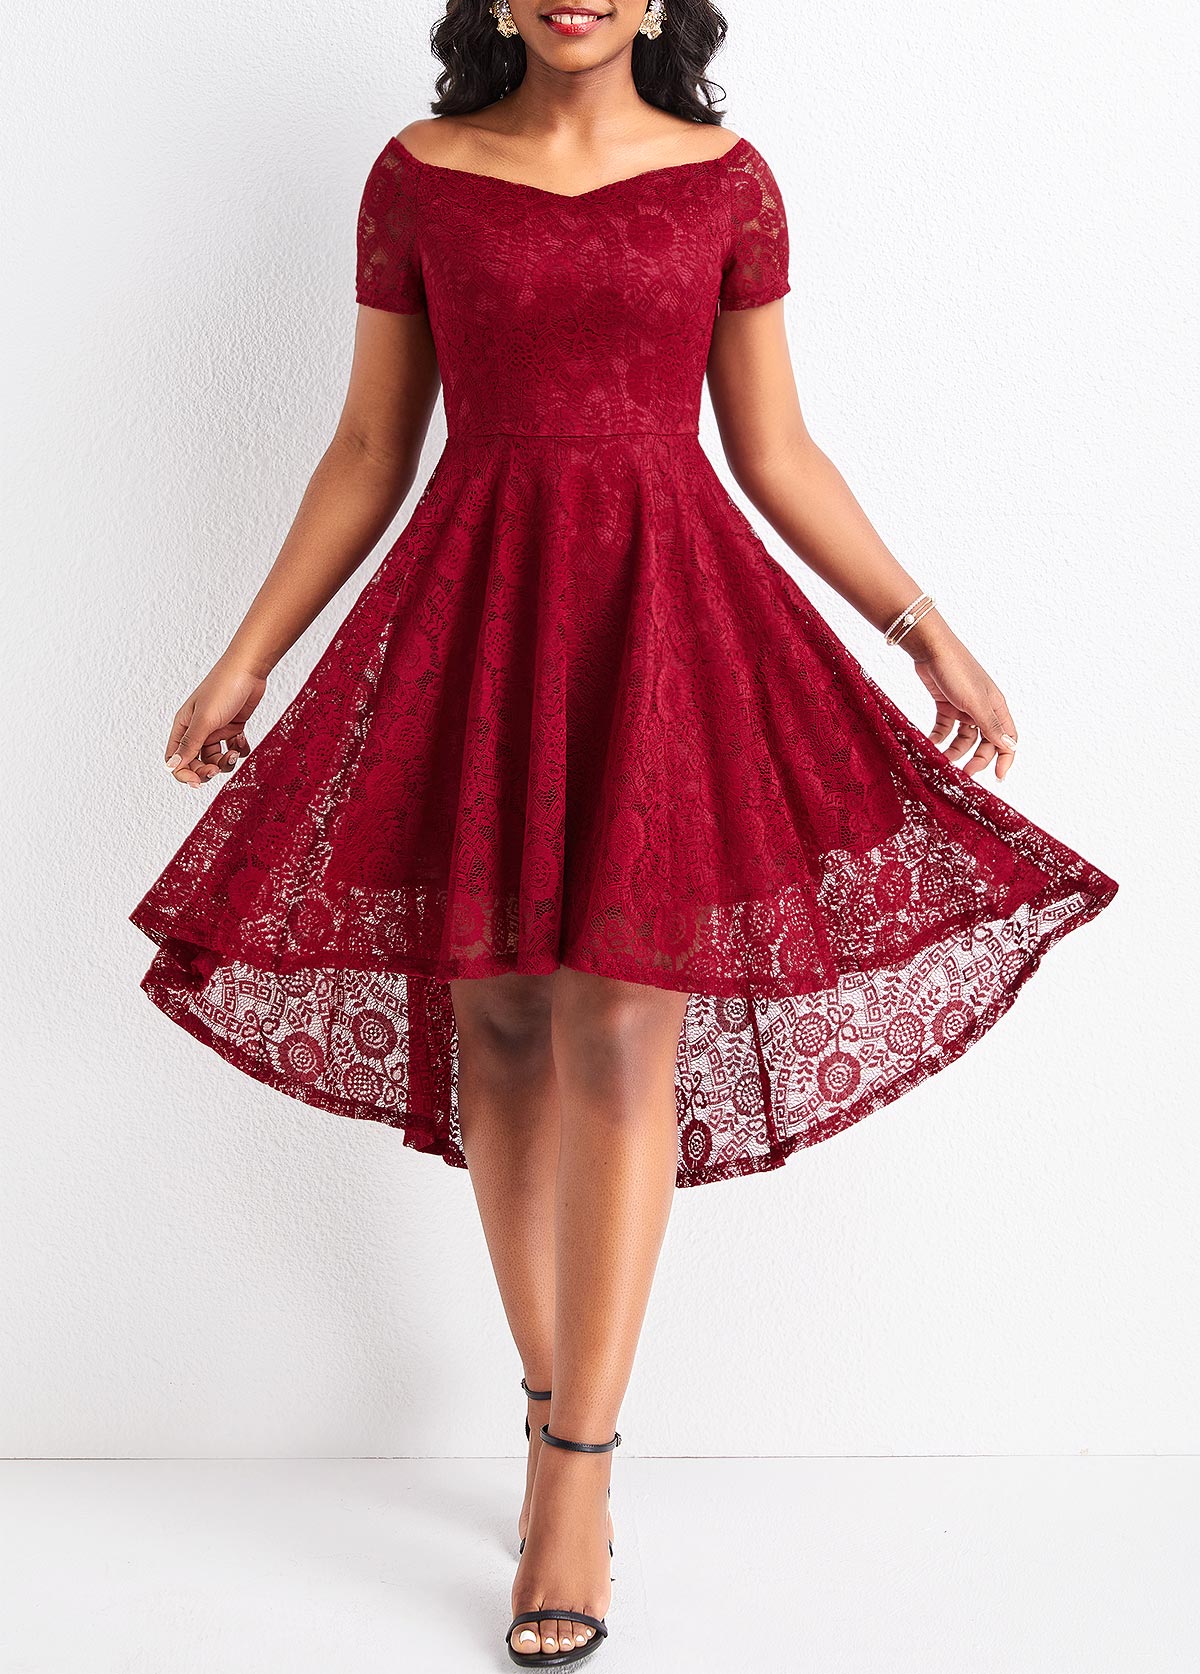 Wine Red Lace High Low Short Sleeve Dress